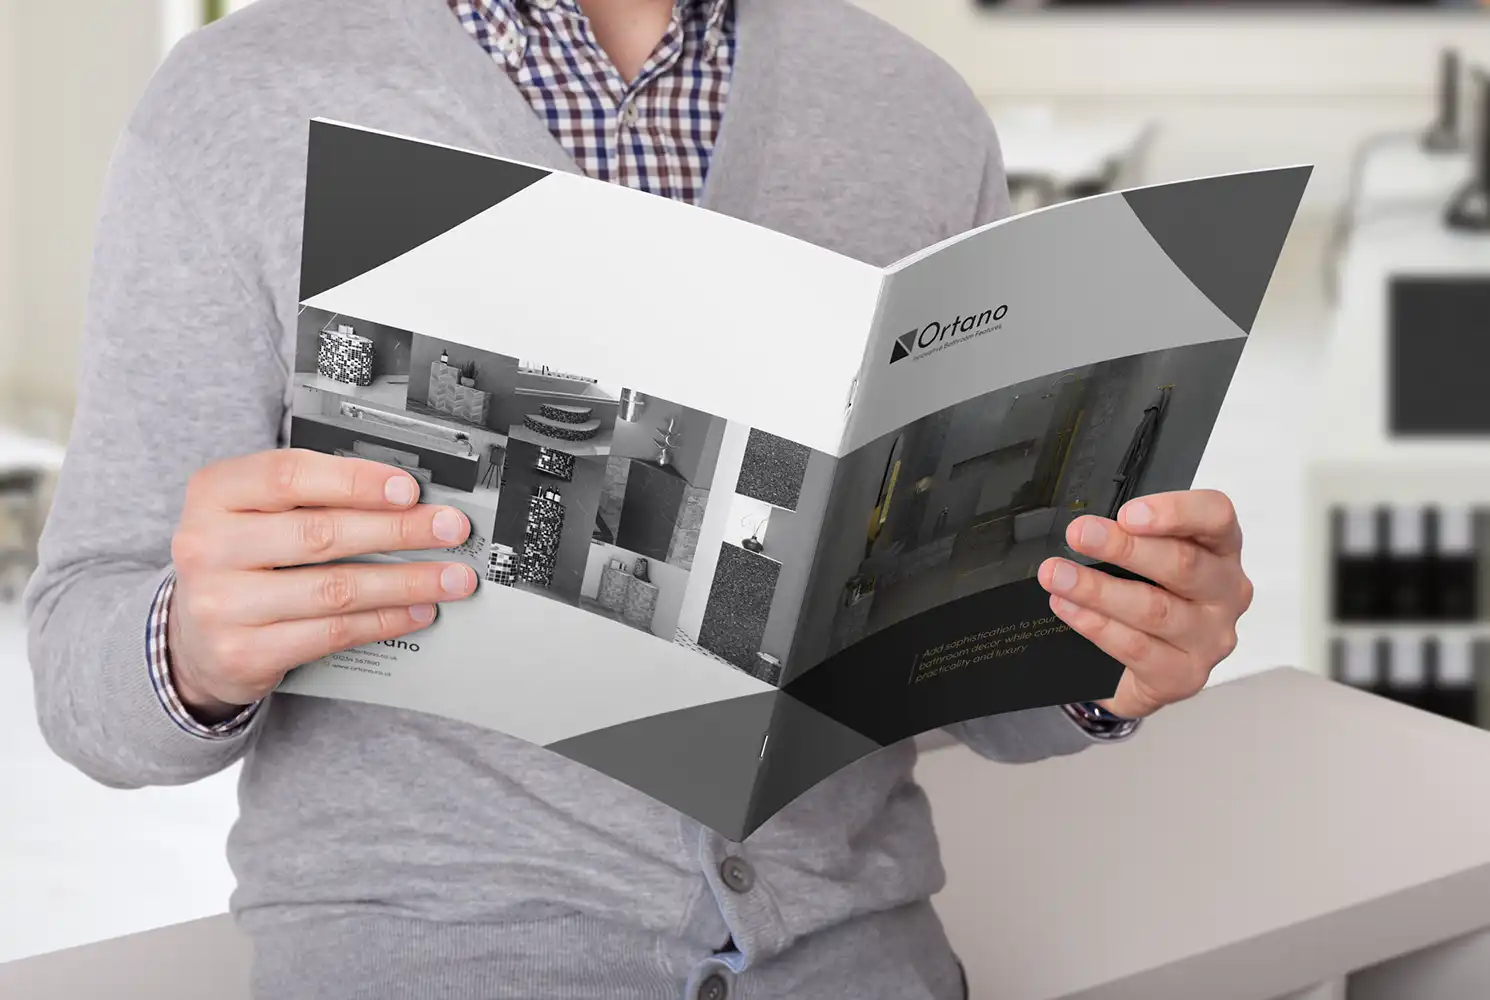 Man holding and looking through the Ortano brochure